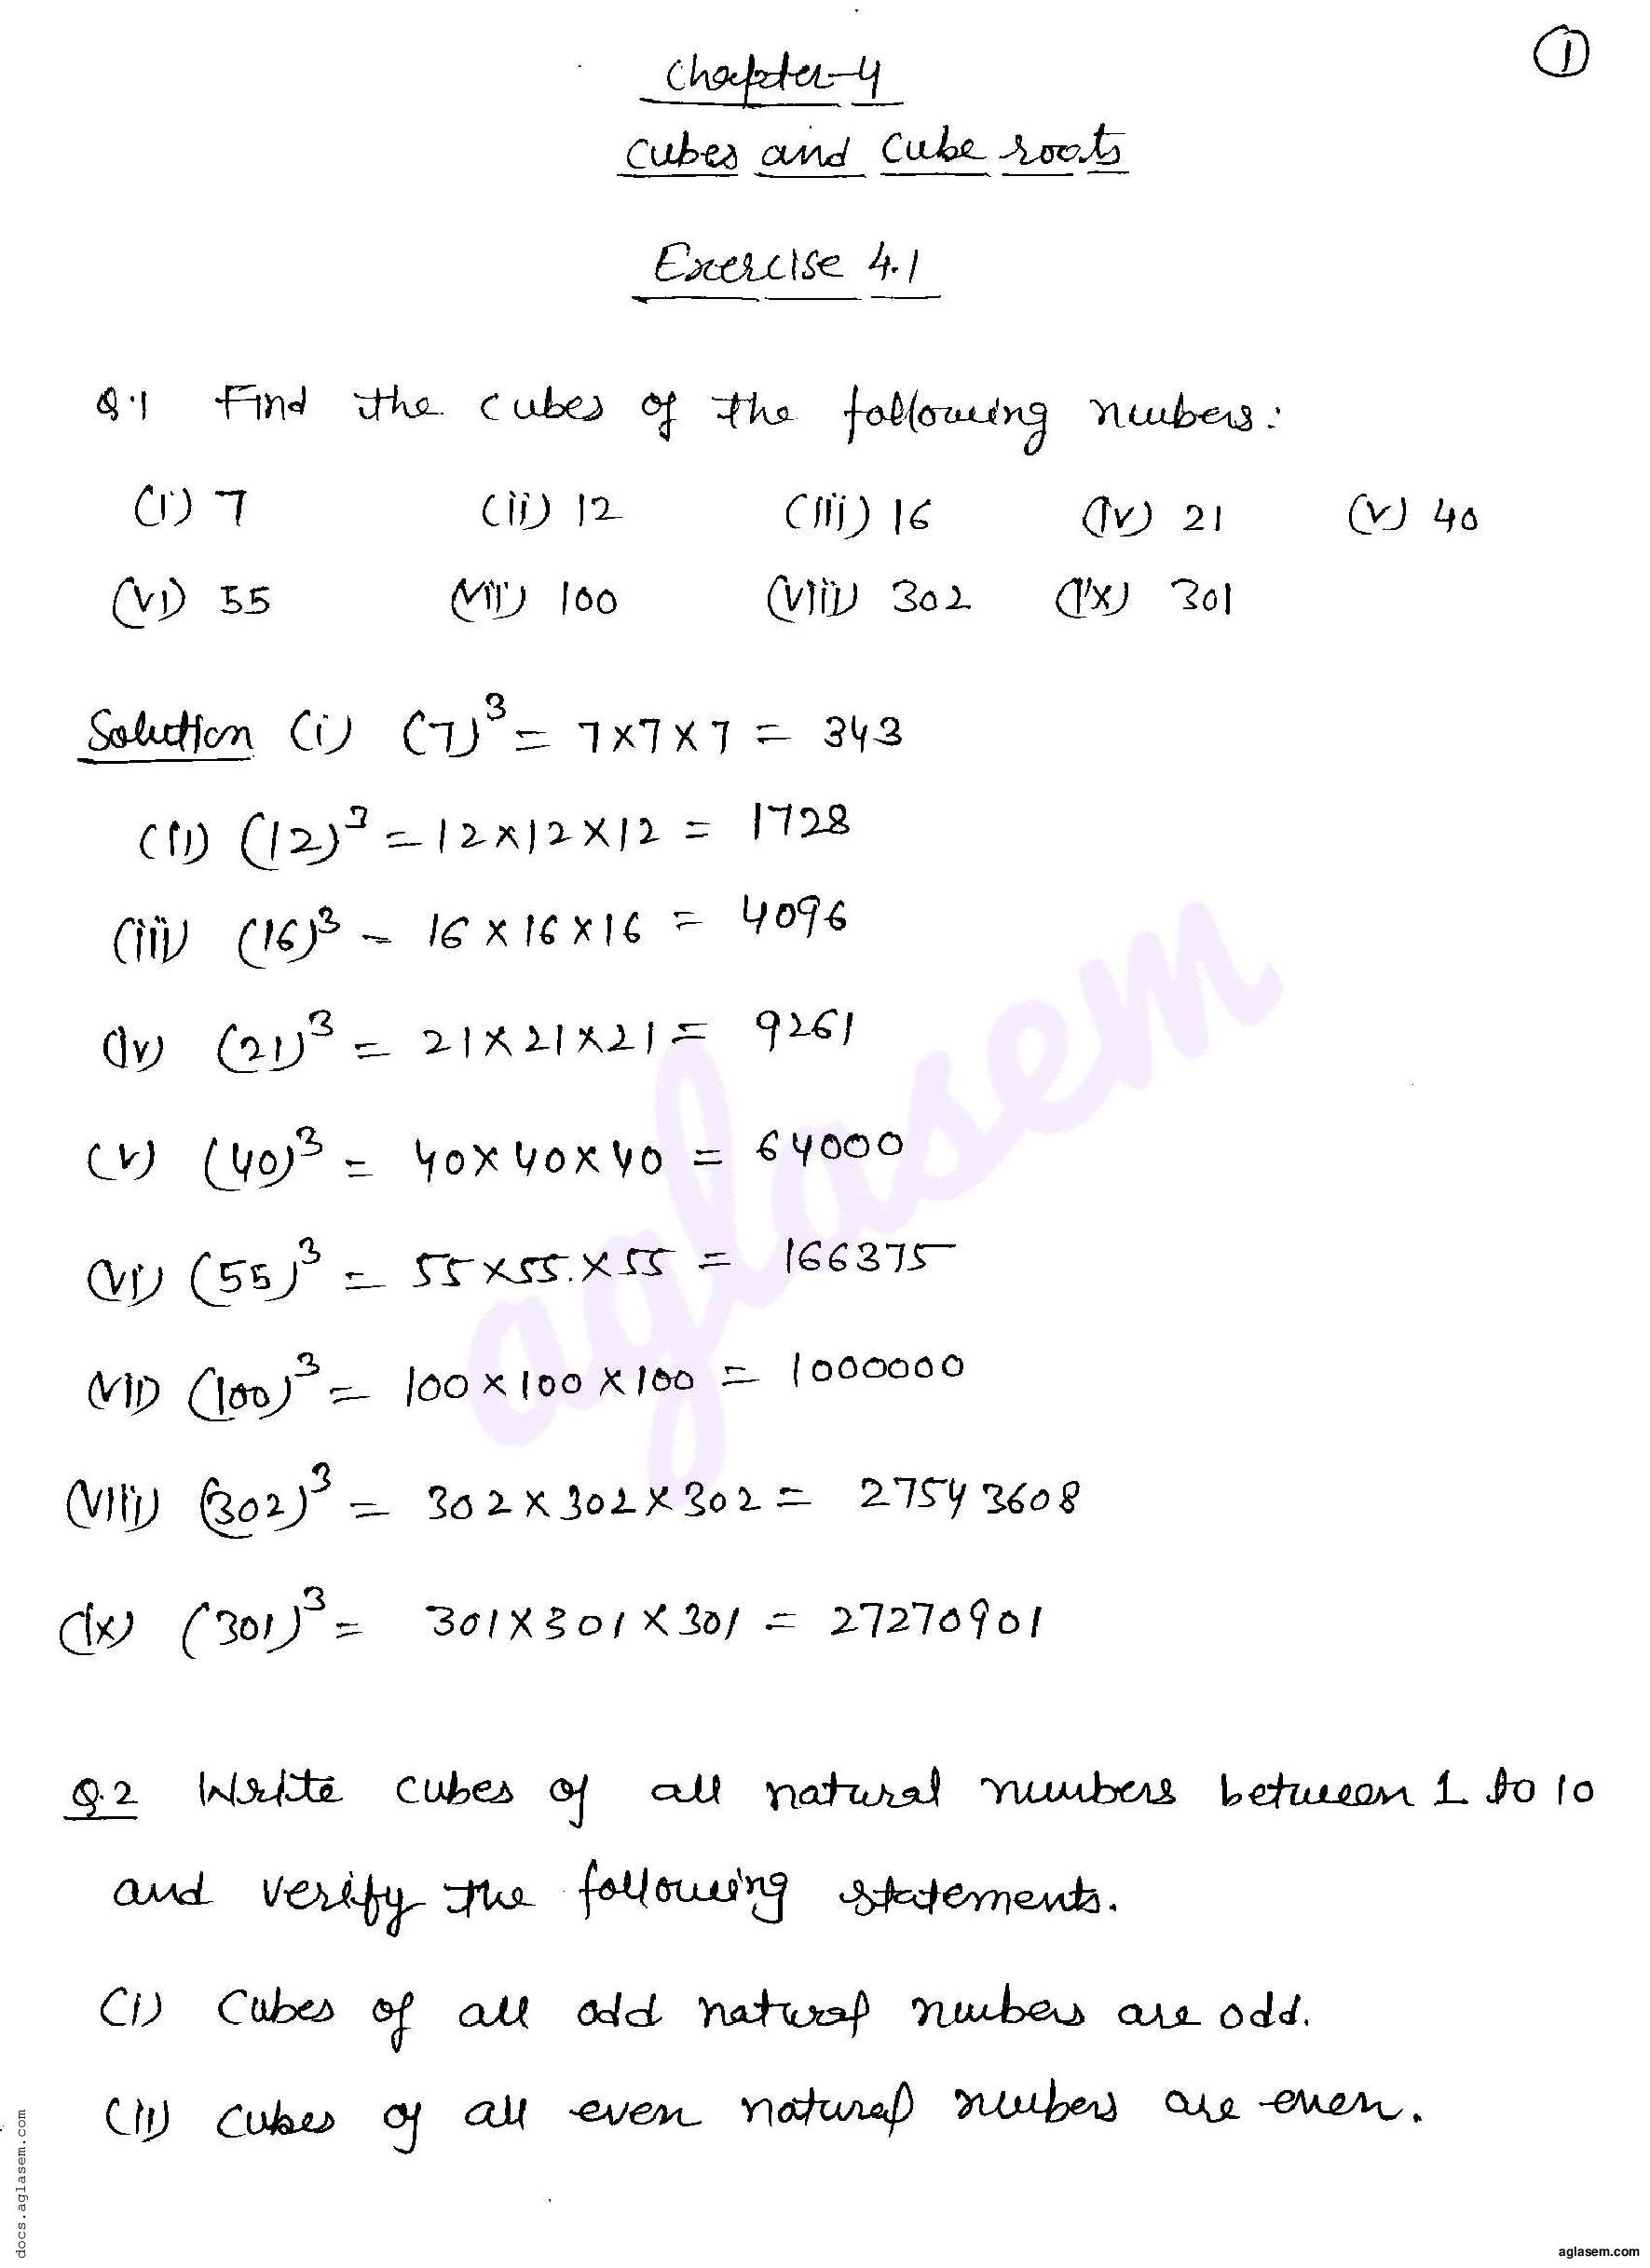 RD Sharma Solutions Class 8 Chapter 4 Cubes and Cube Roots Exercise 4.1 - Page 1